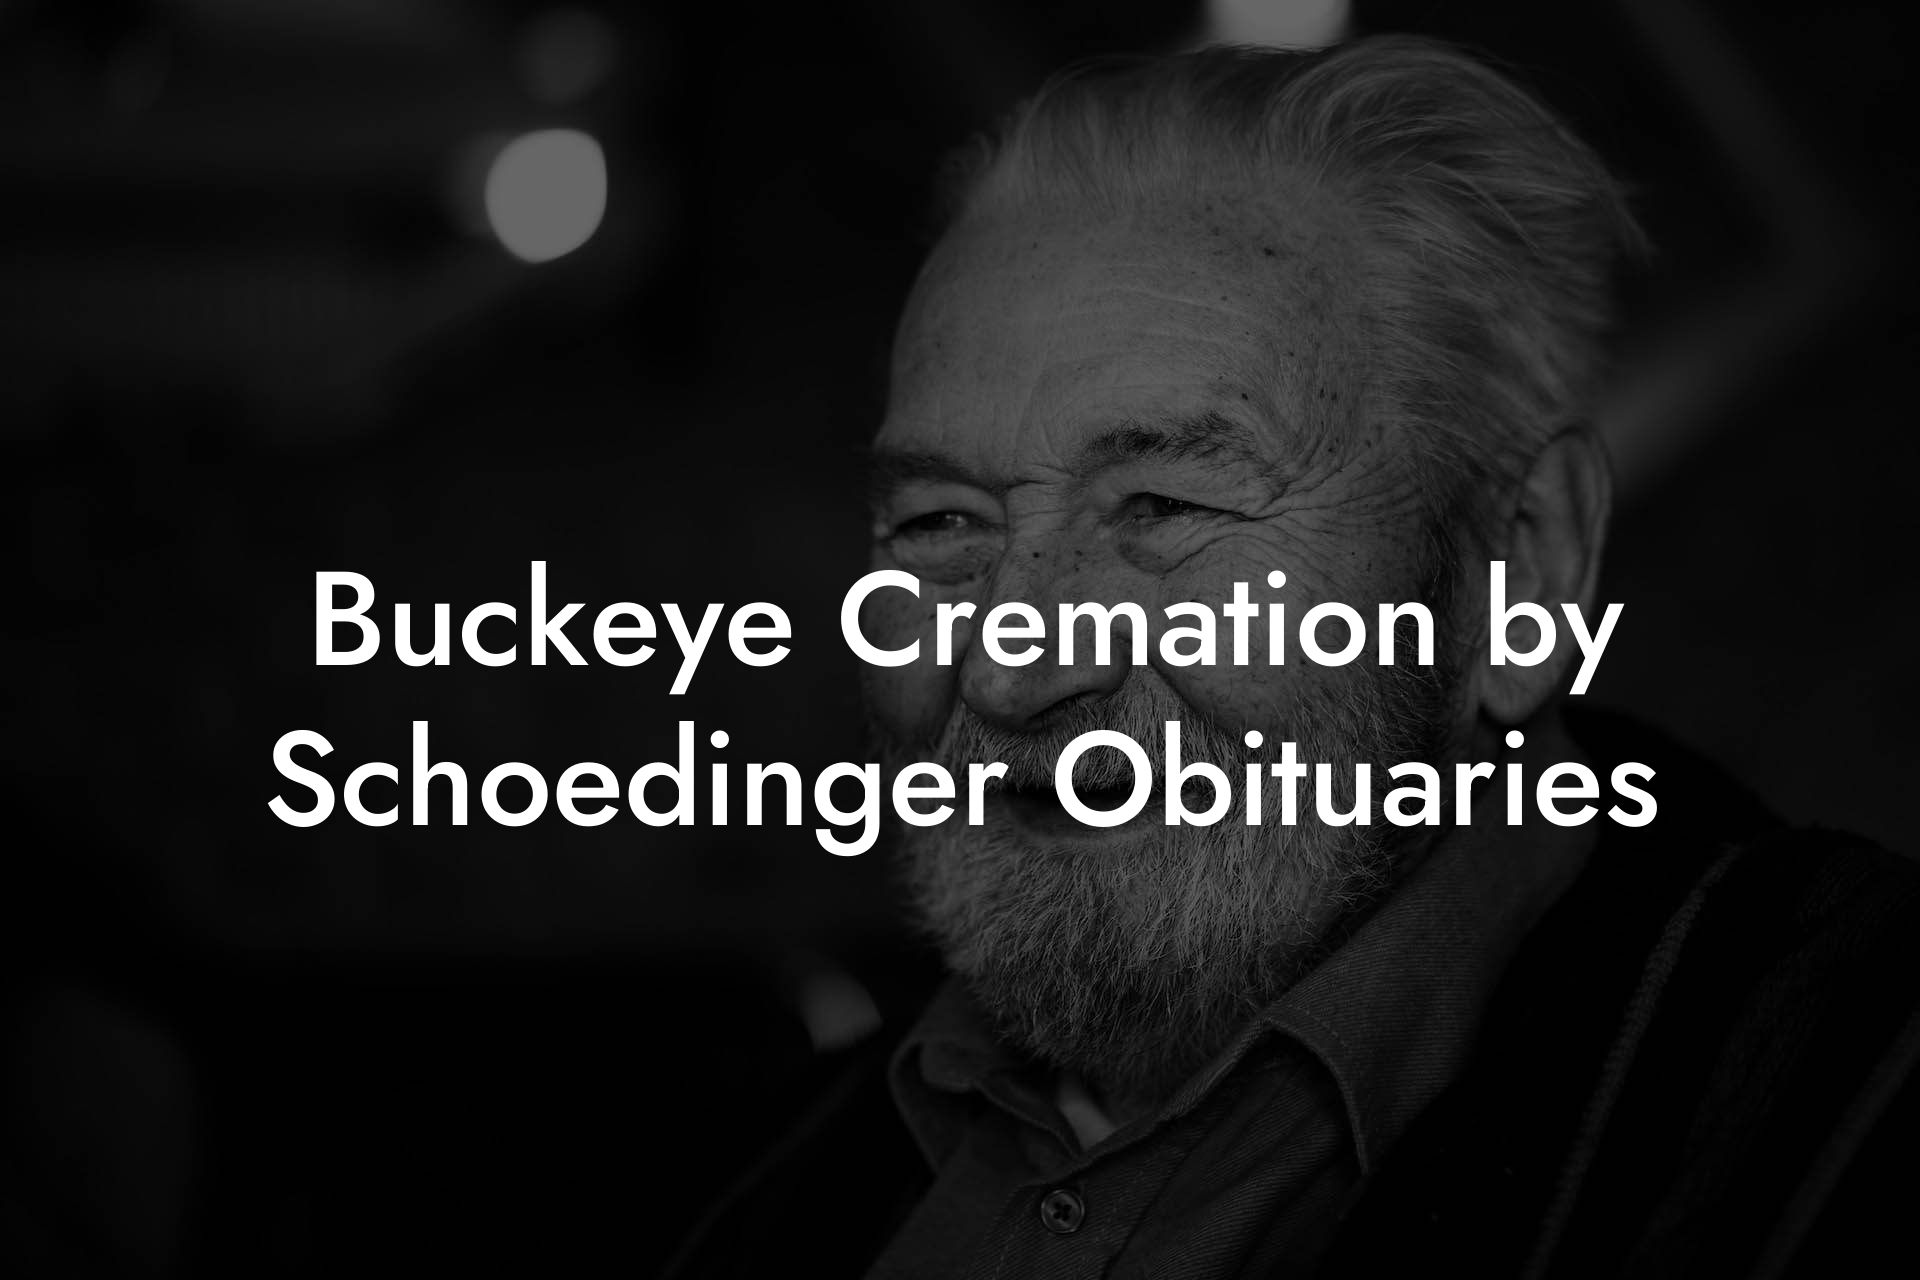 Buckeye Cremation by Schoedinger Obituaries